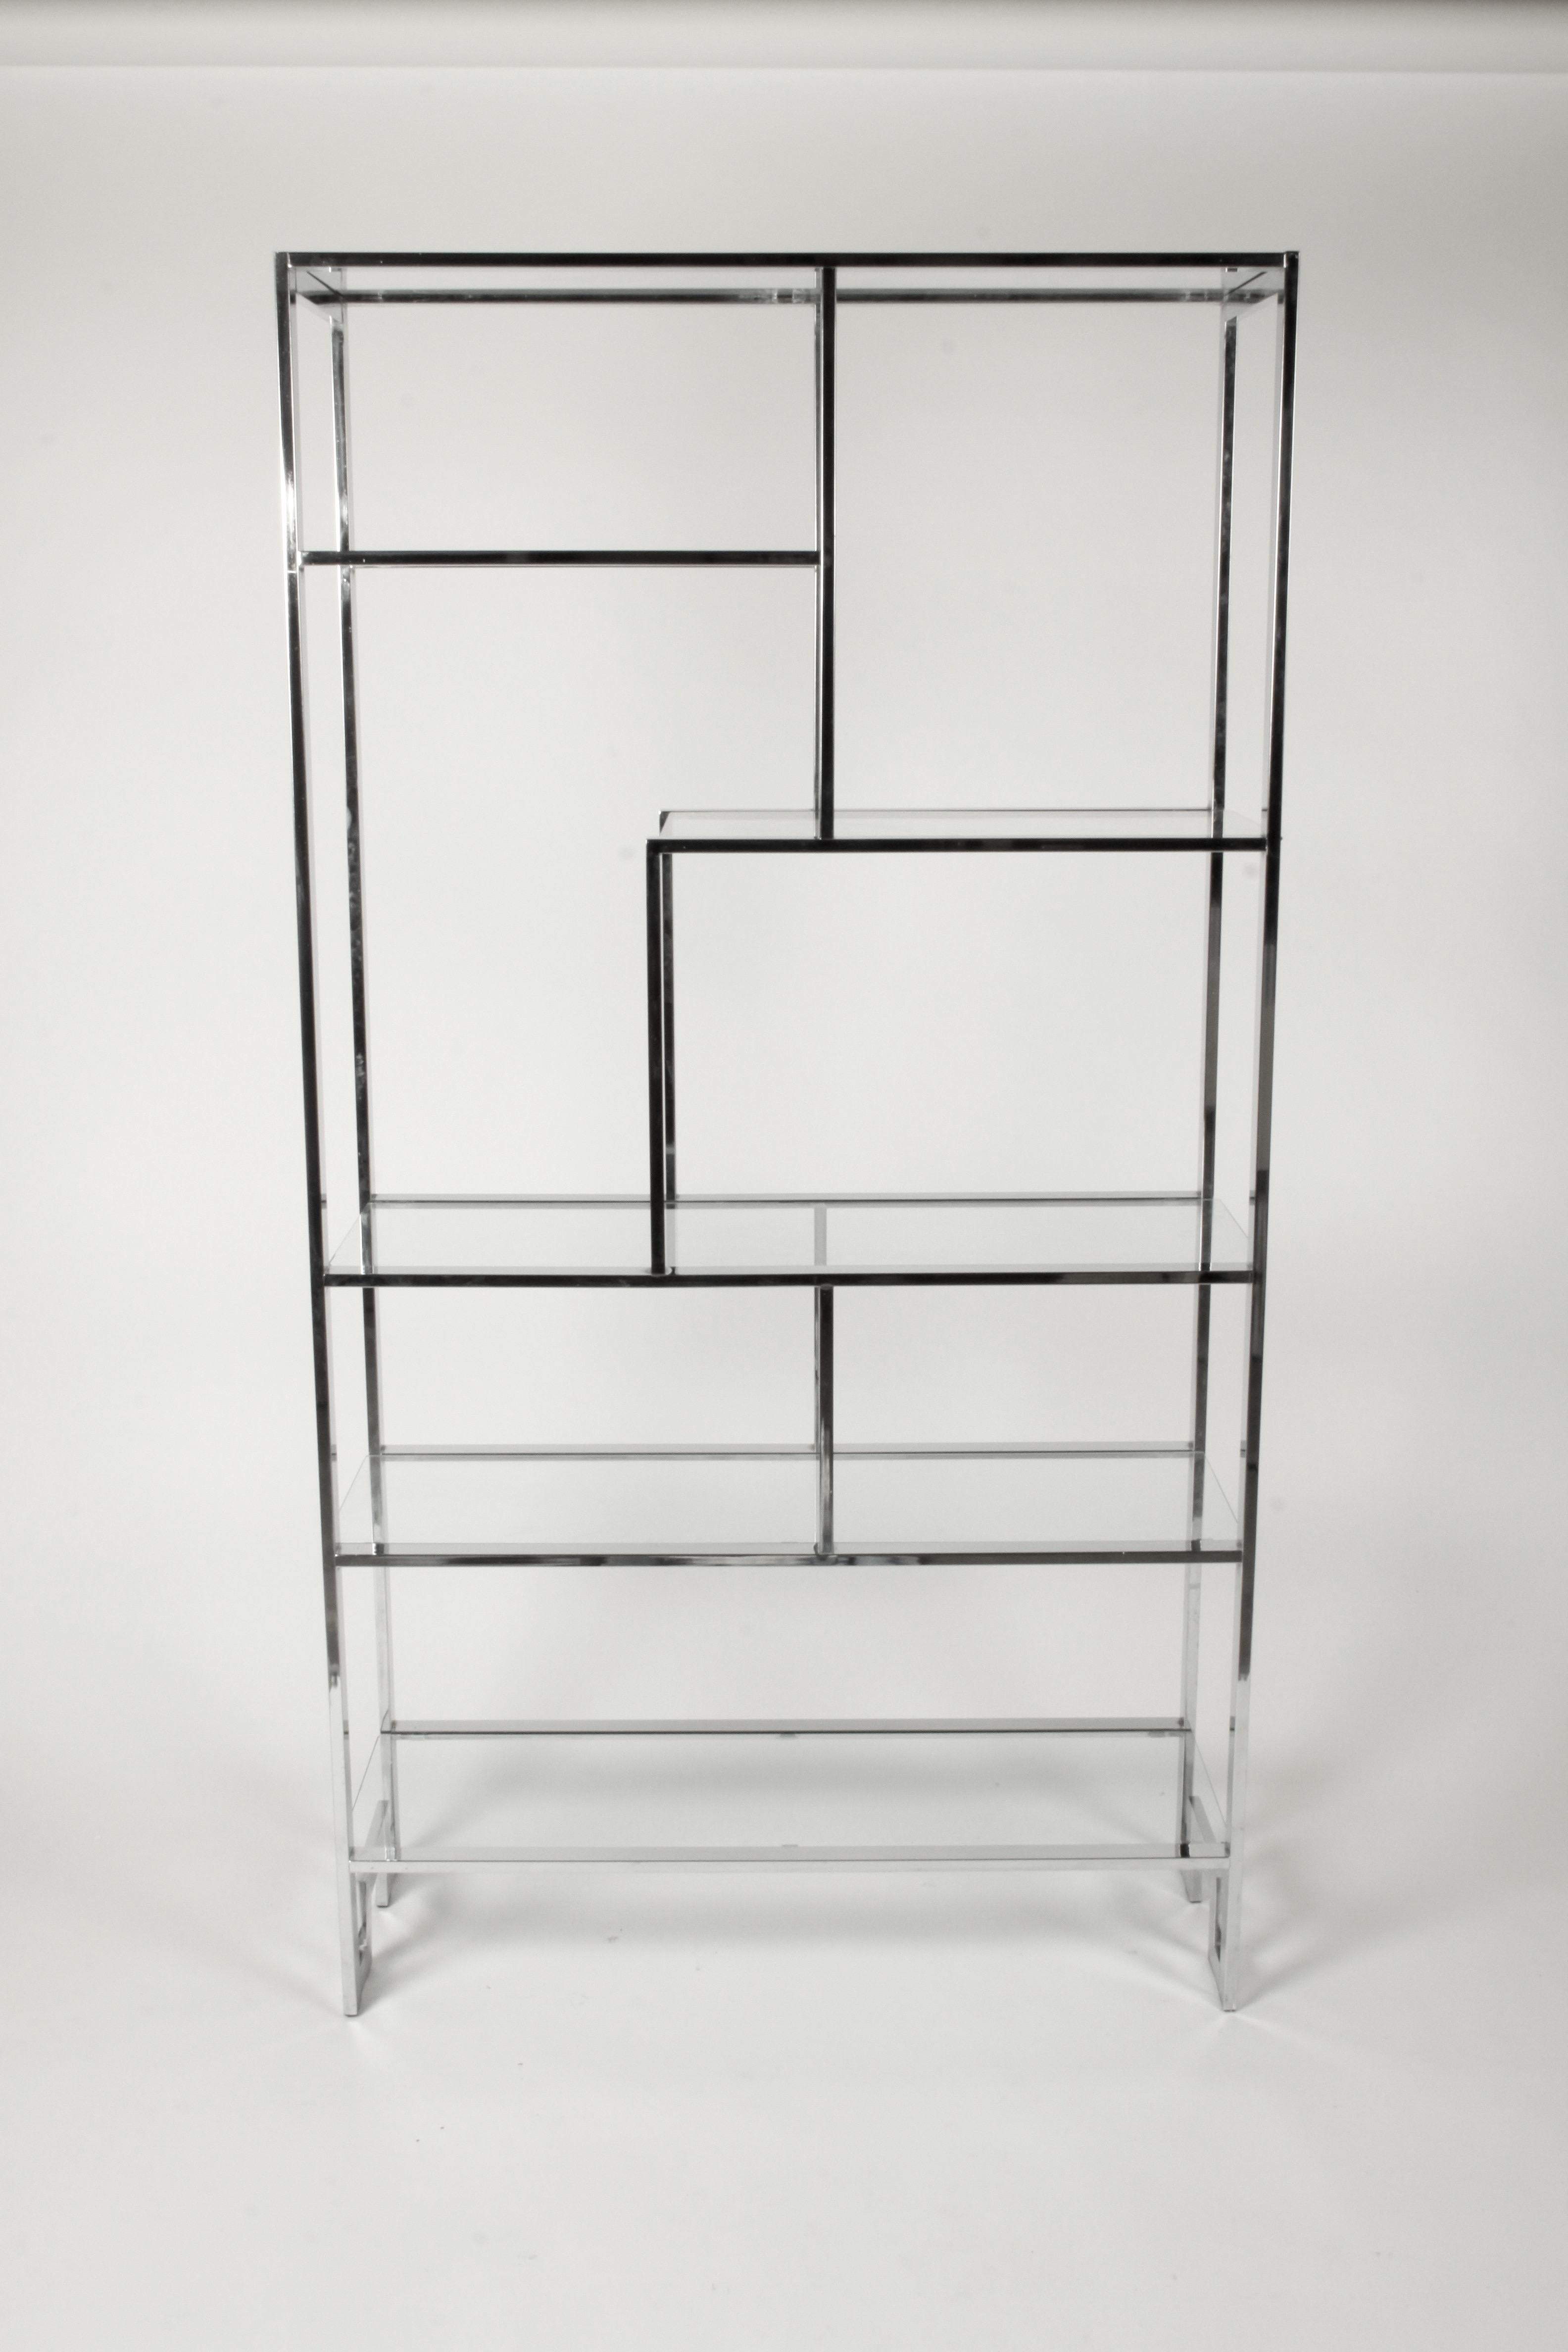 1970s chrome geometric configuration étagère by DIA or Design Institute of America with glass shelves and Greek key detail in base. Very nice original condition, chrome is bright, few minor chips to edges of glass and light scratches. In the style